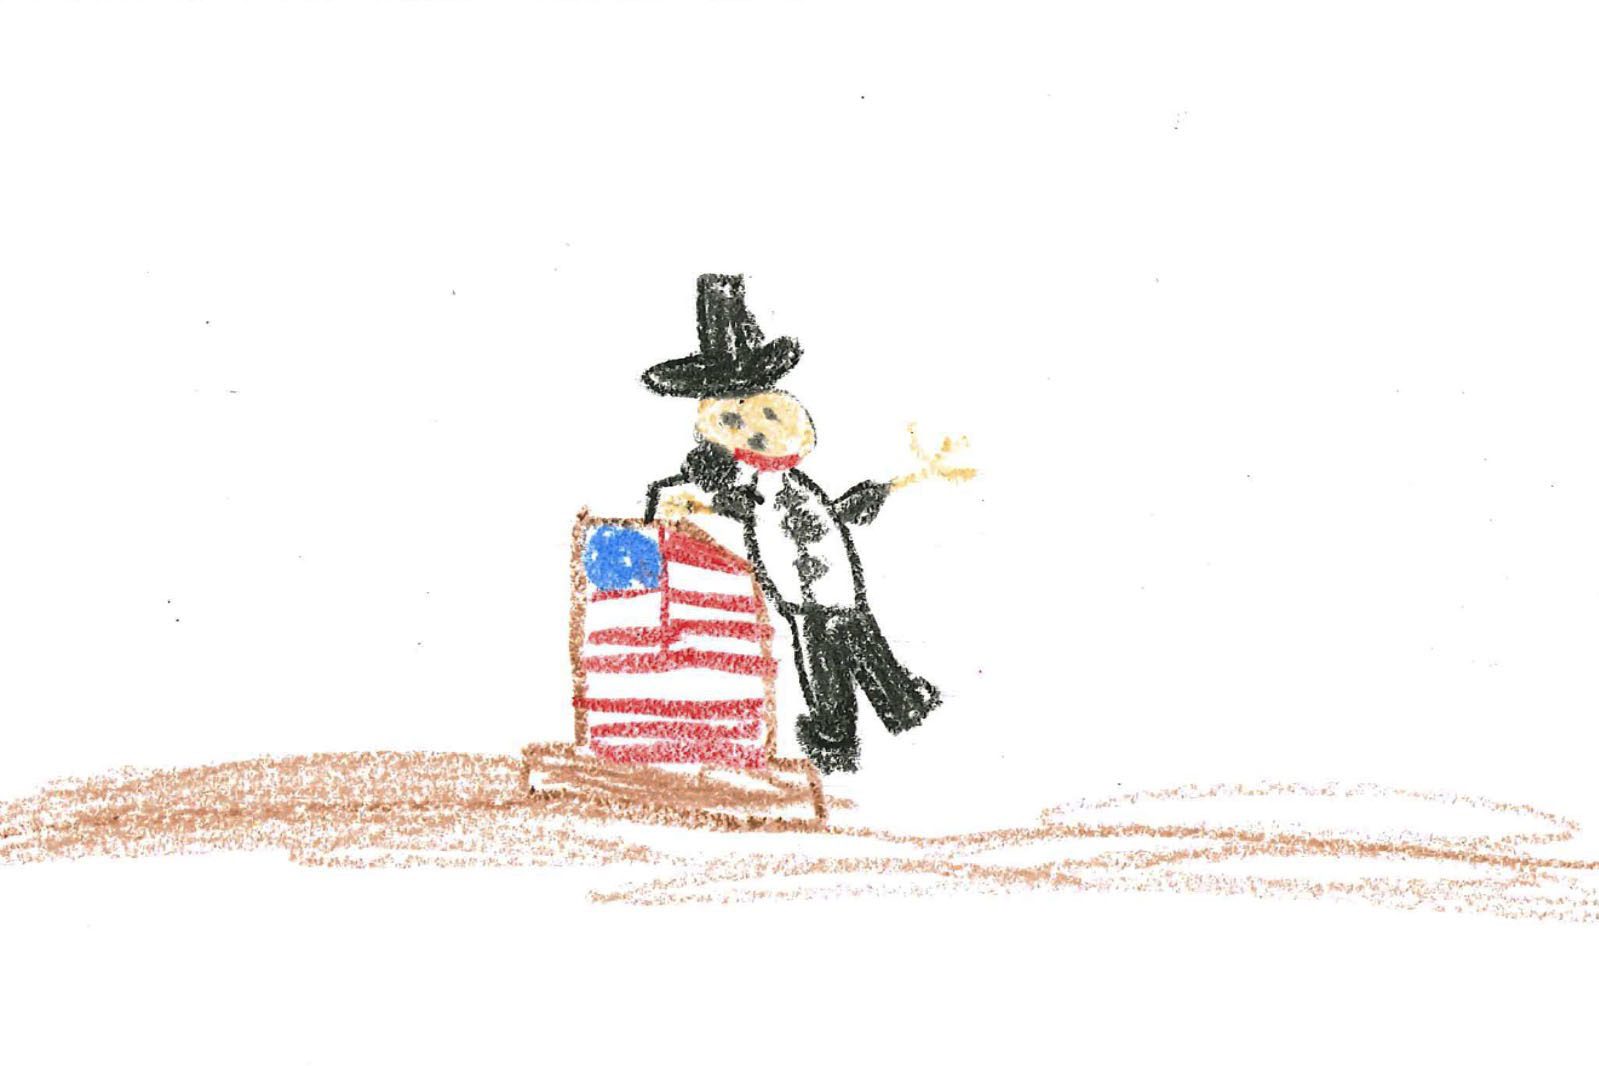 A child's drawing is pictured. The child drew what appears to be a male figure wearing a black outfit and black hat giving a speech at a podium. The podium is decorated with an American flag.